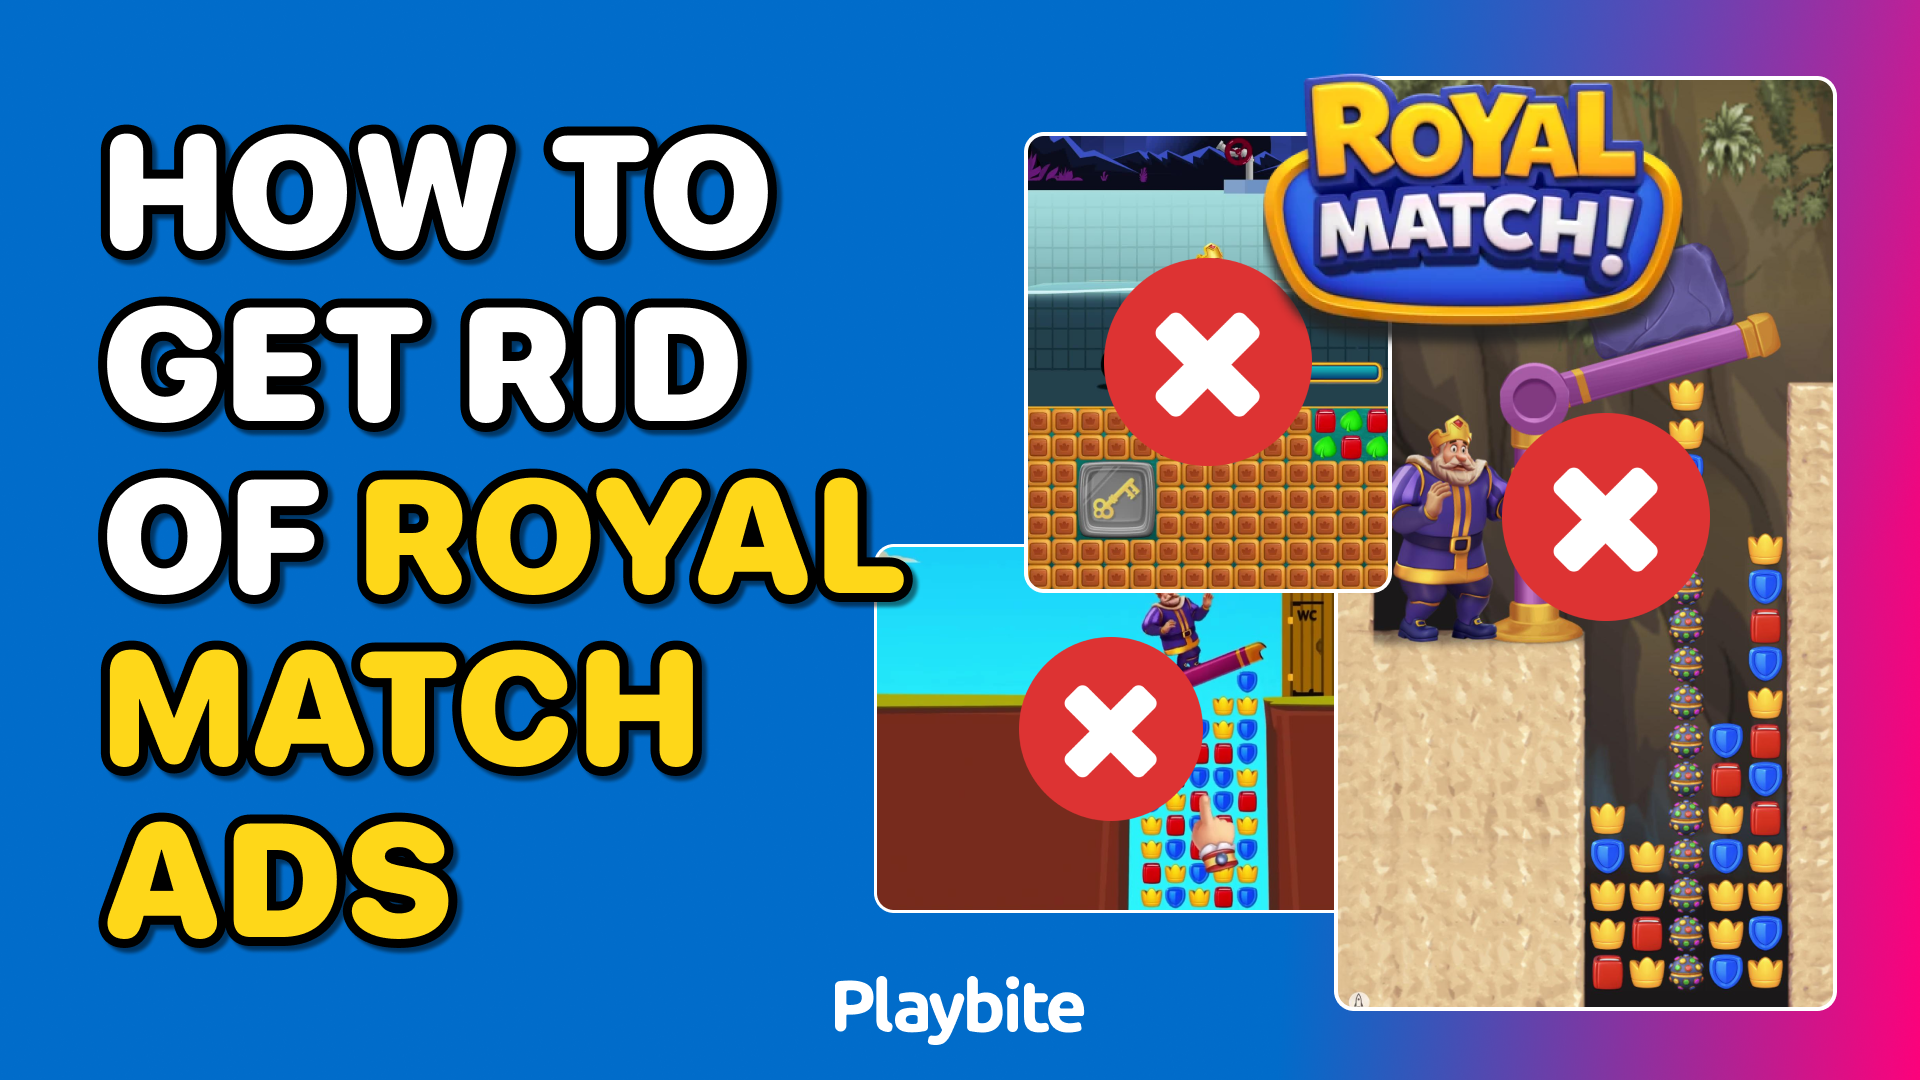 How To Get Rid Of Royal Match Ads